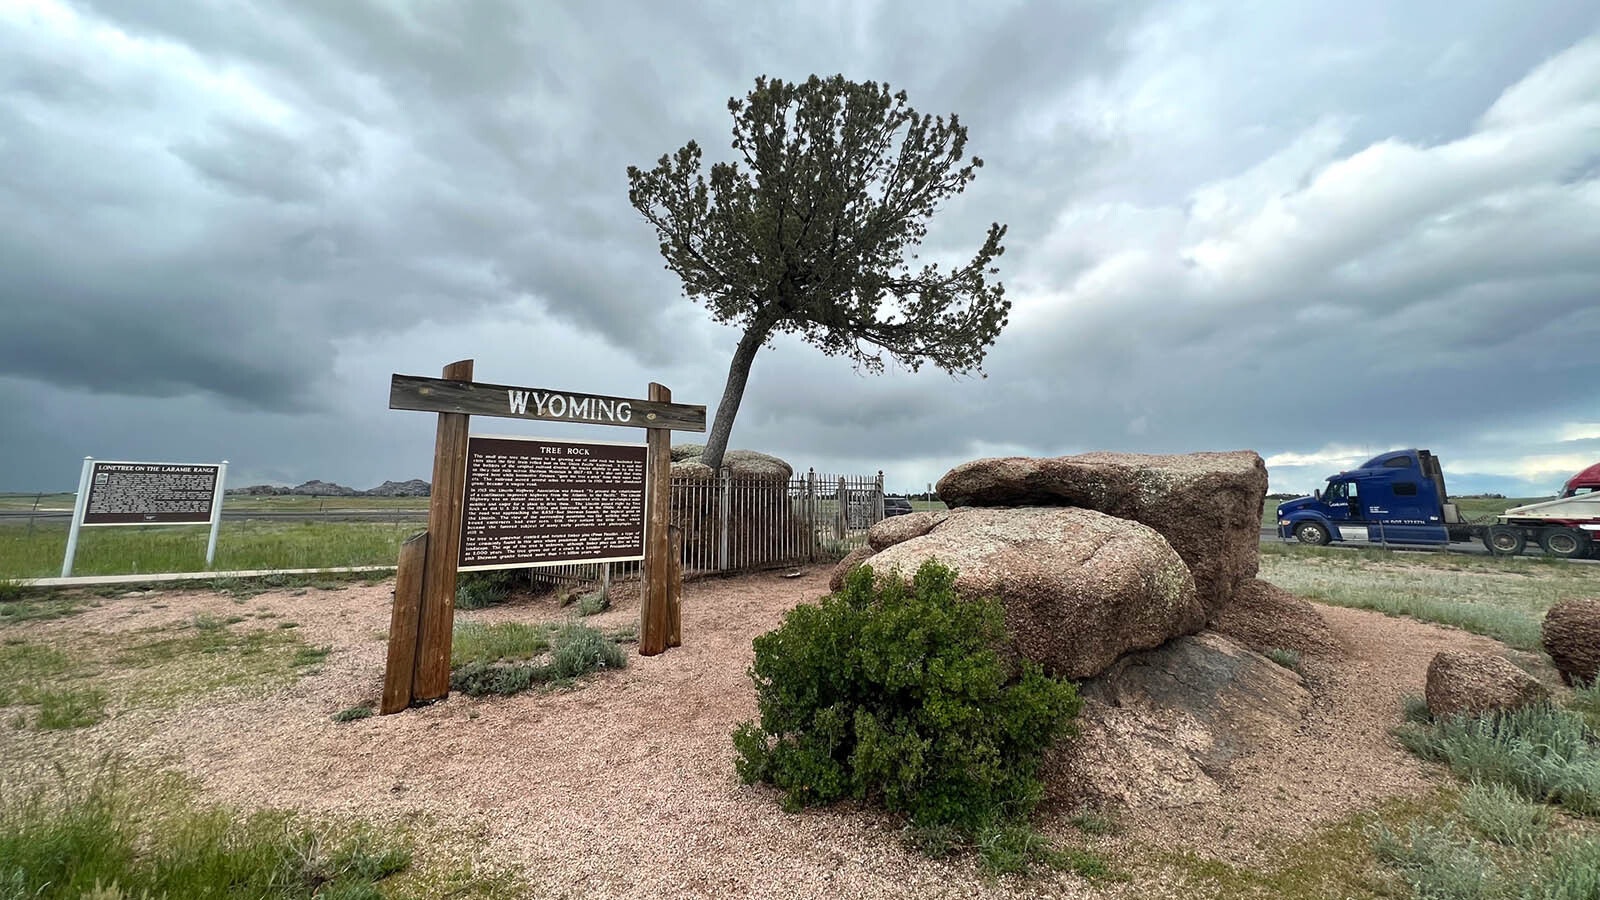 Tree Rock is a limber pine discovered growing out of a boulder in 1868 when the Union Pacific Railroad build the railroad 50 feet from it. It's now in the middle of Interstate 80 about 30 miles west of Cheyenne.